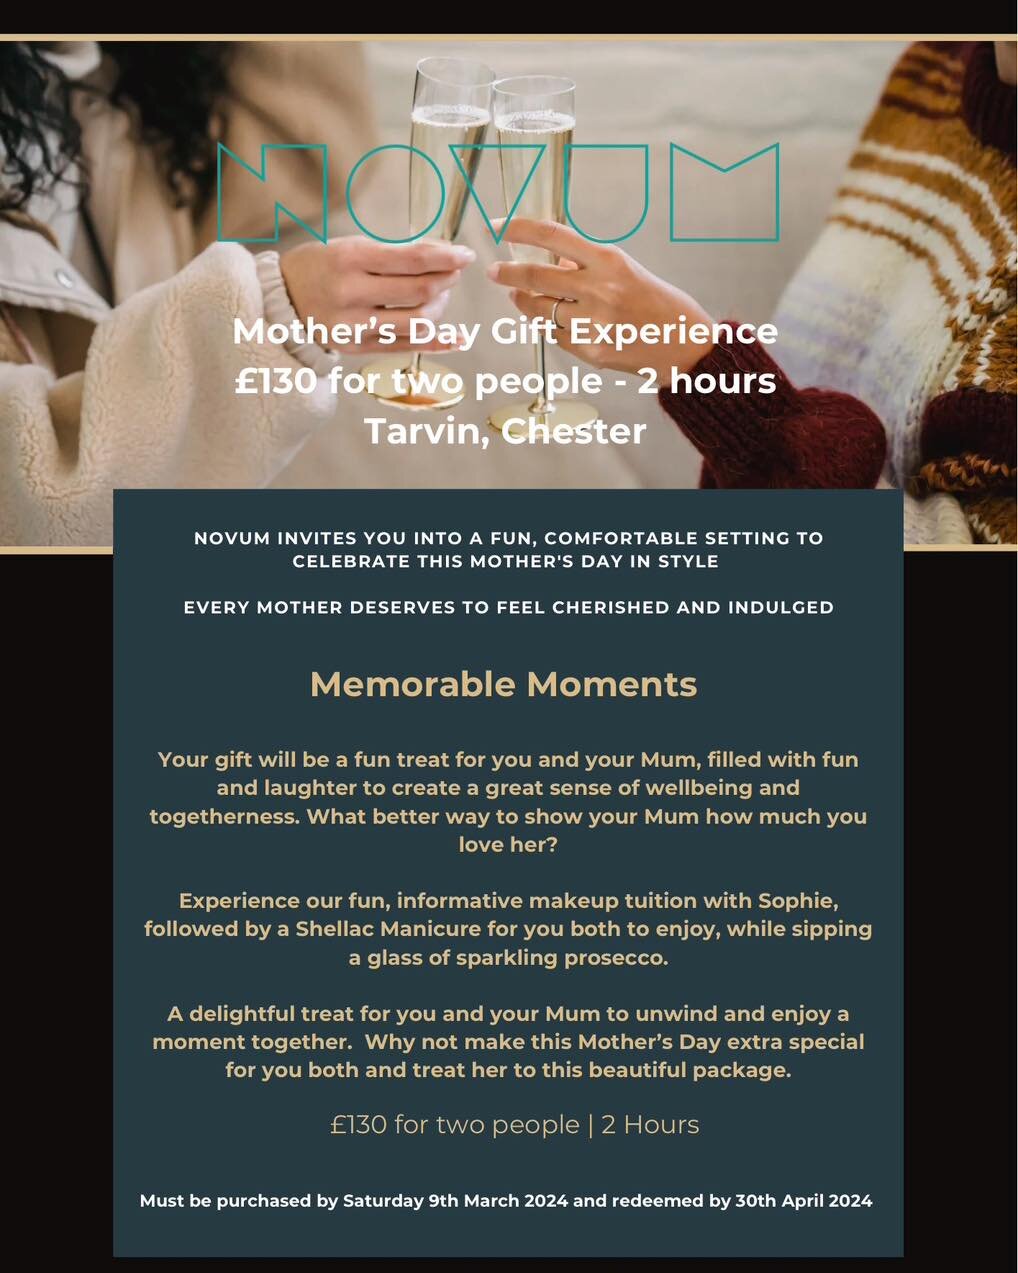 Mother's Day Gift Experience | Novum Tarvin

Novum, Tarvin invites you into a fun, comfortable setting to celebrate this Mother&rsquo;s Day in style 💕

To book in please call or message us&hellip;
📞01829 740112

#novumsalons #cheshire #beauty #moth